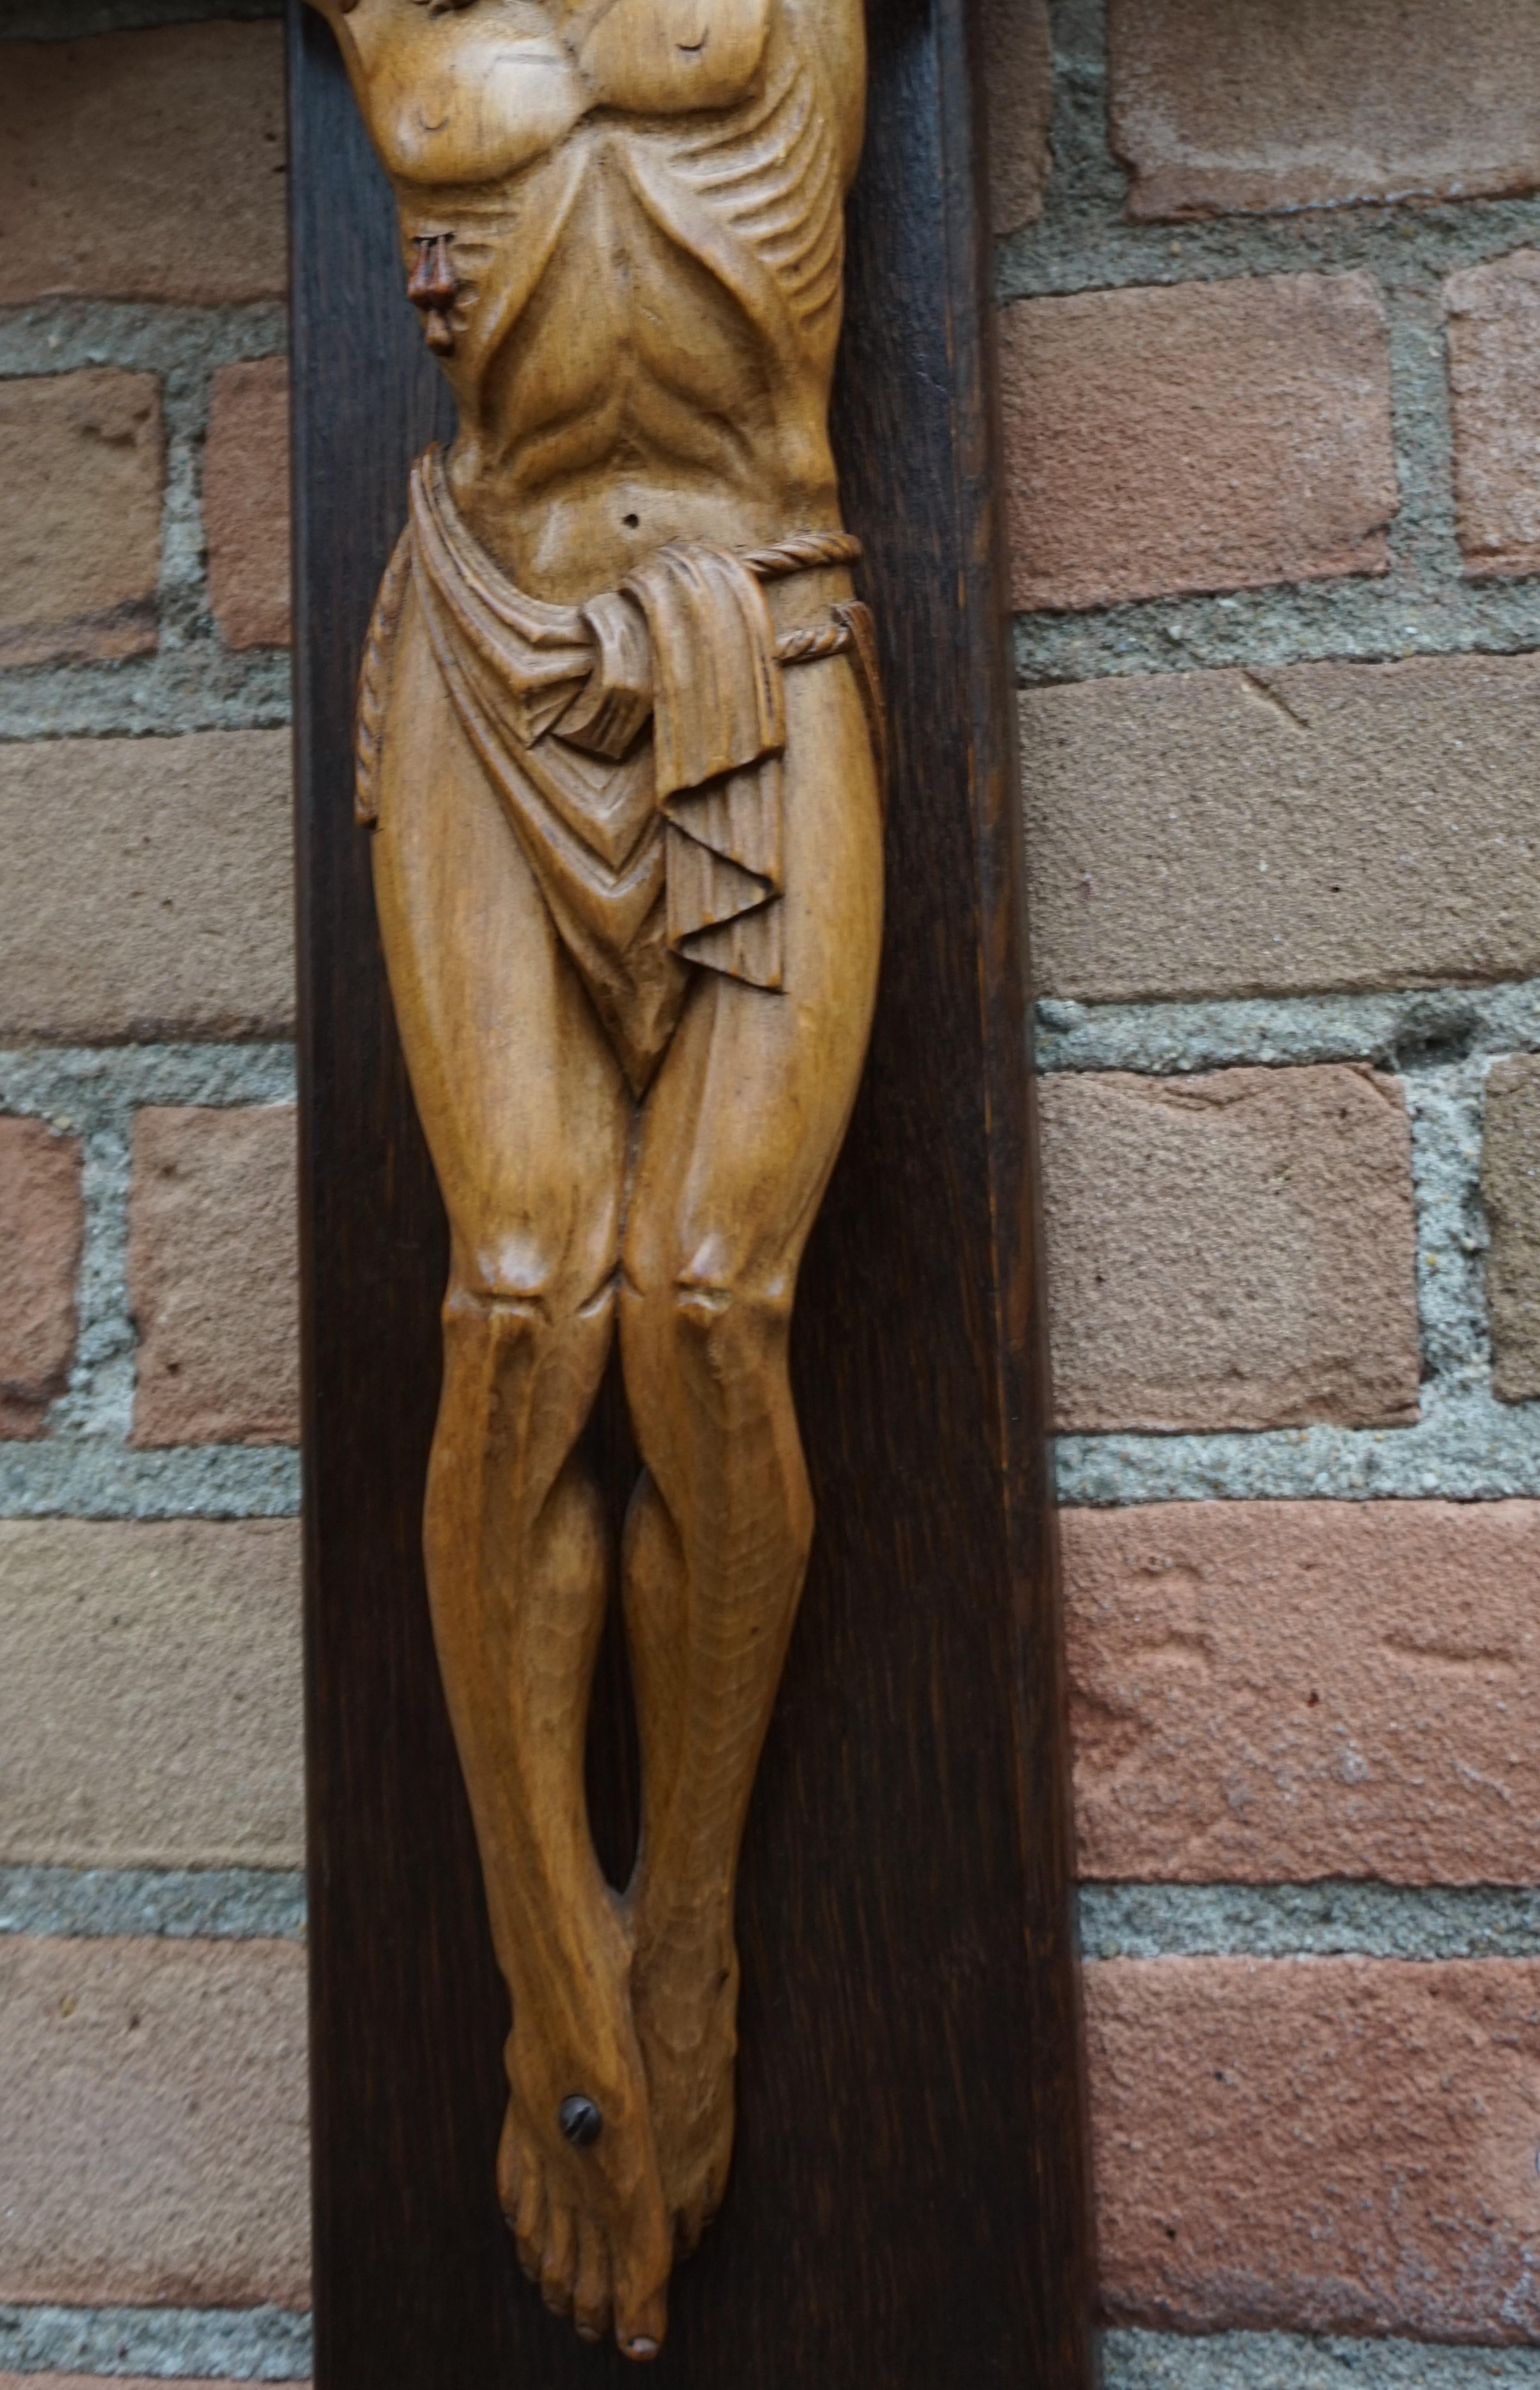 European Good Size and Hand Carved Mid to Early 20th Century Corpus of Christ or Crucifix